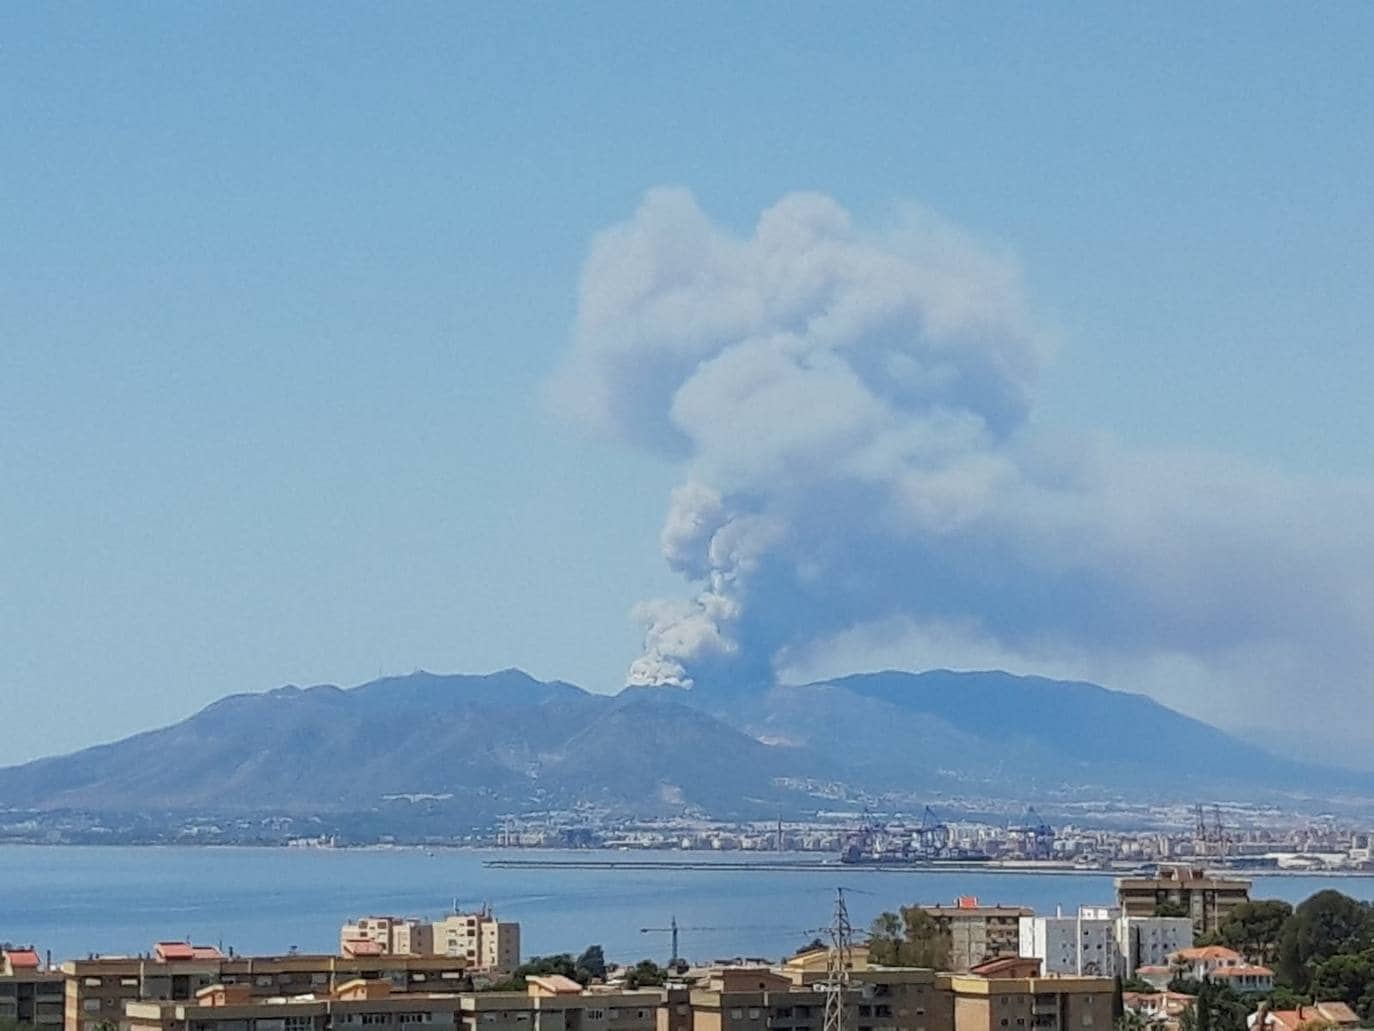 The column of smoke can be seen from practically the entire western Costa del Sol, and even from Malaga city 